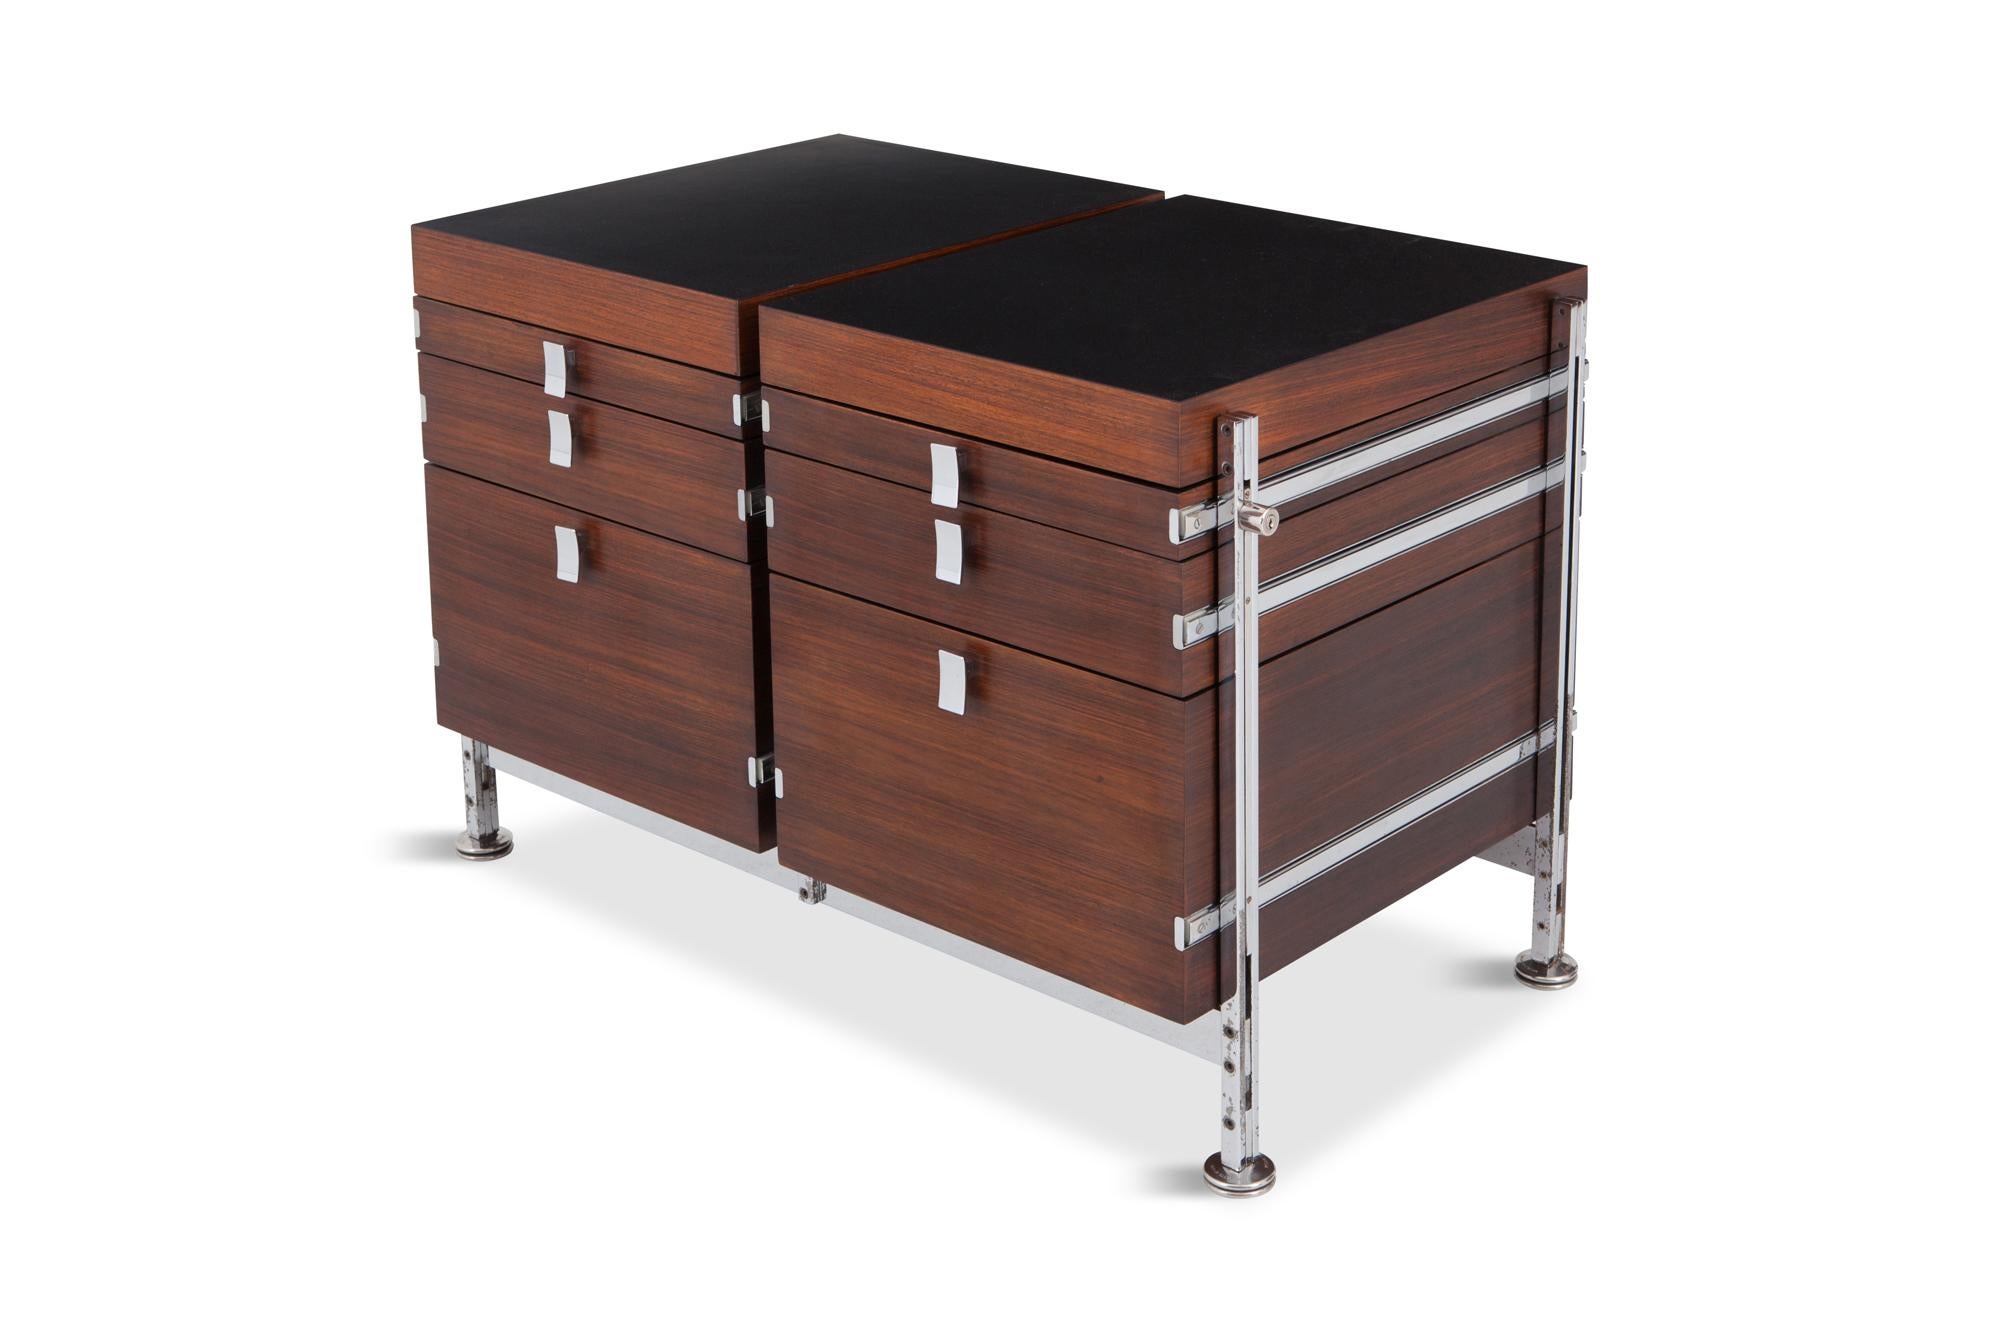 Jules Wabbes Mahogany Double Chest of Drawers for Mobilier Universel (Moderne der Mitte des Jahrhunderts)